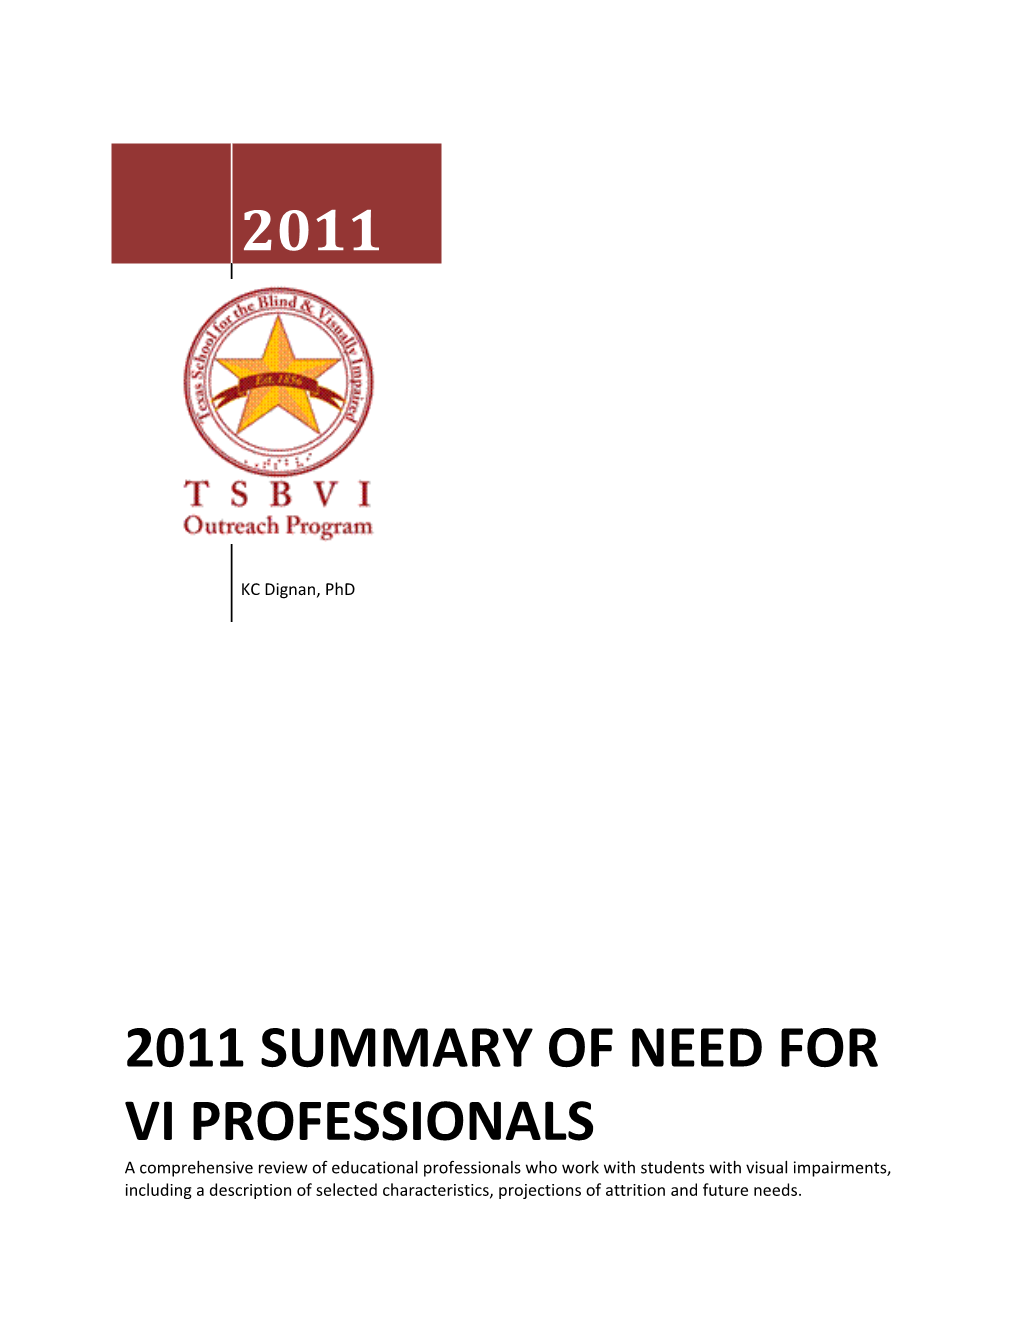 Summary of Need for VI Professionals